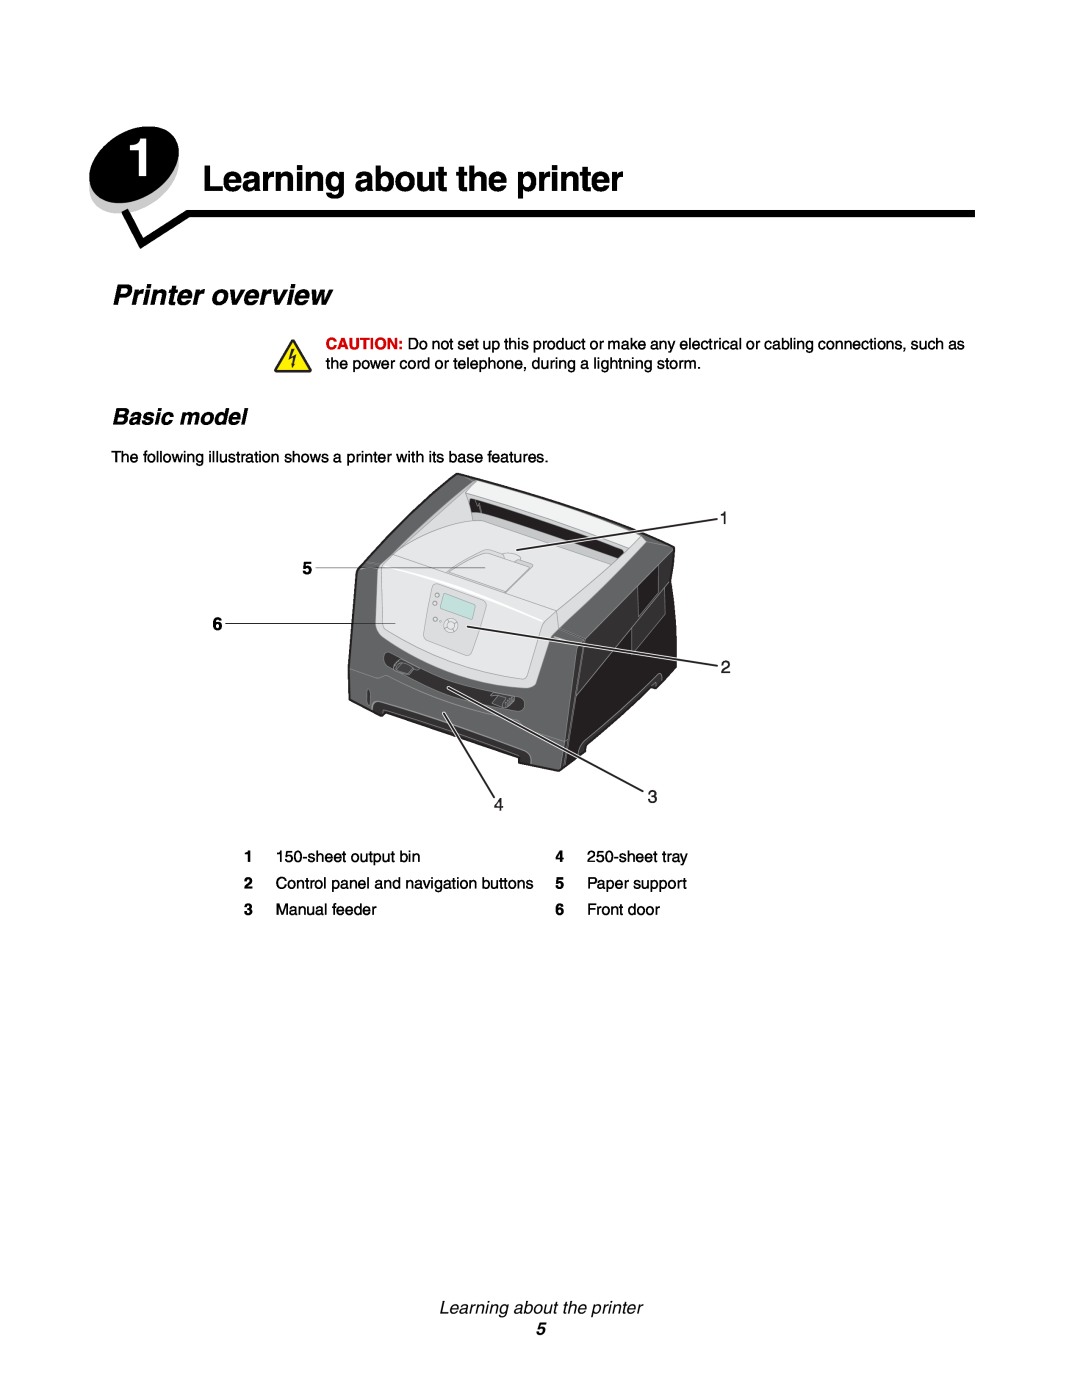 Lexmark 450dn manual Learning about the printer, Printer overview, Basic model, sheet output bin, Manual feeder, Front door 